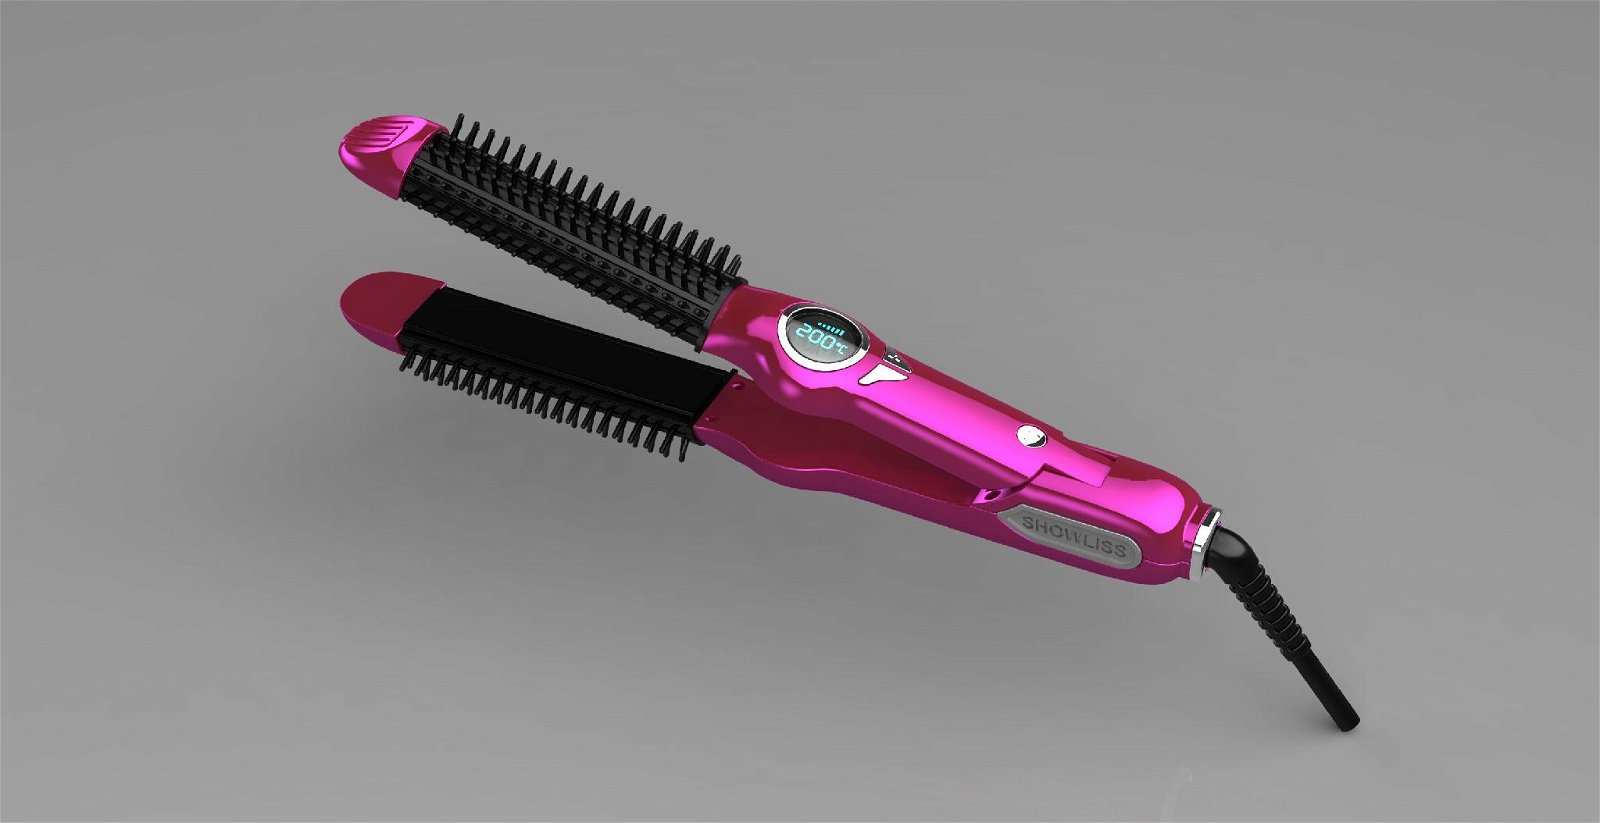 Hot Straightening Irons Come With LCD Display Electric Straight Hair Comb Brush 4